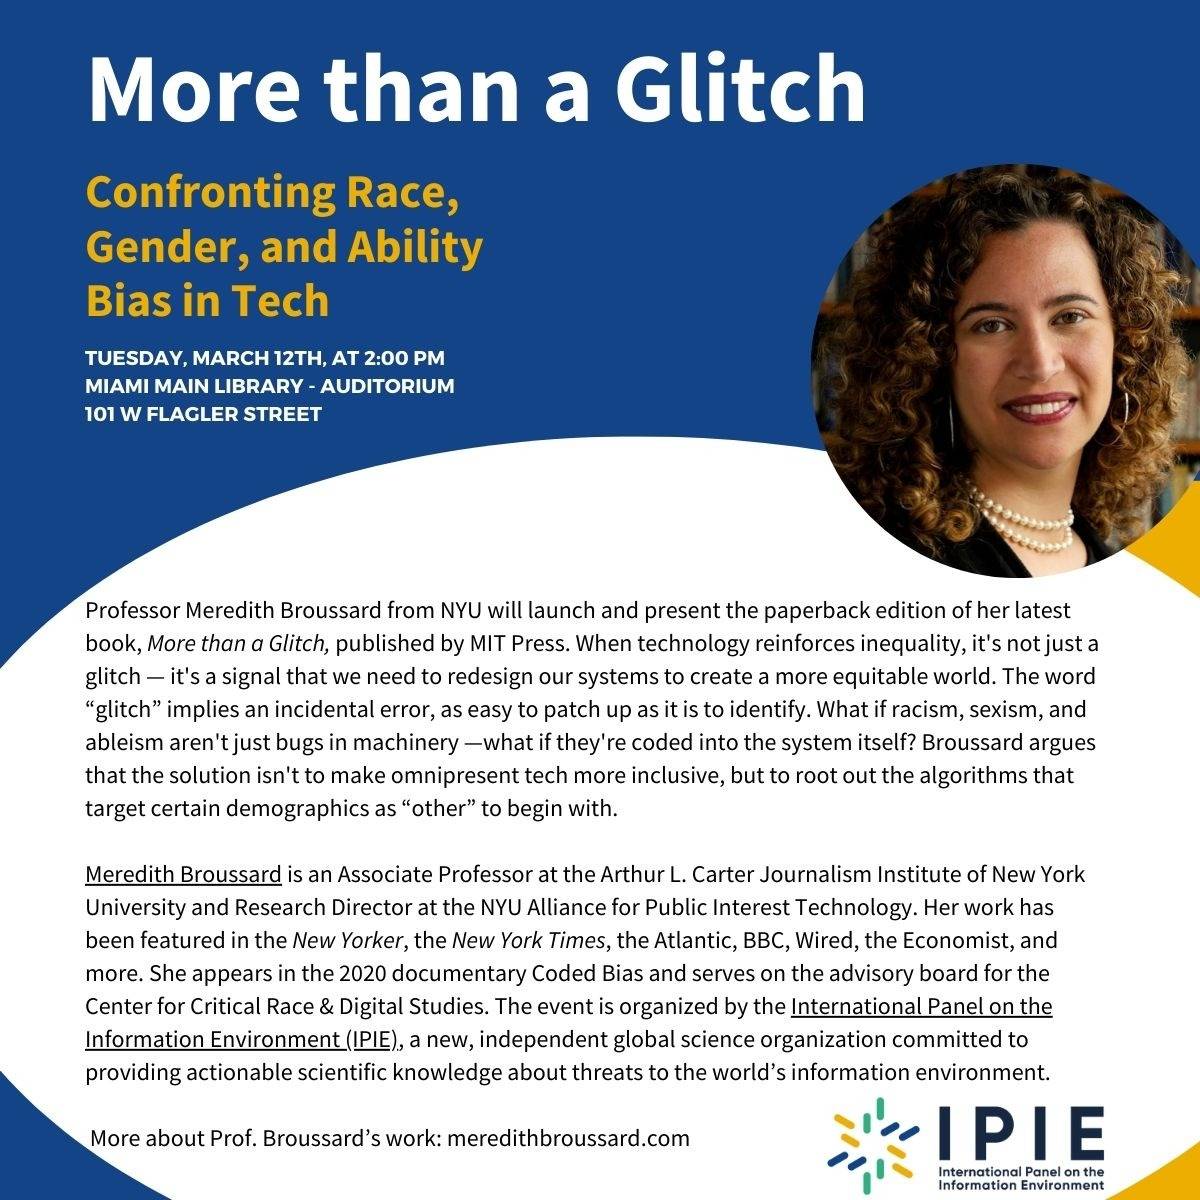 Heading to Miami this weekend for IPIE.info's exec meeting. If you care about bias in tech, don't miss our public event next Tuesday at the Miami Main Library, where Prof. @merbroussard will launch the paperback edition of 'More than a Glitch.'